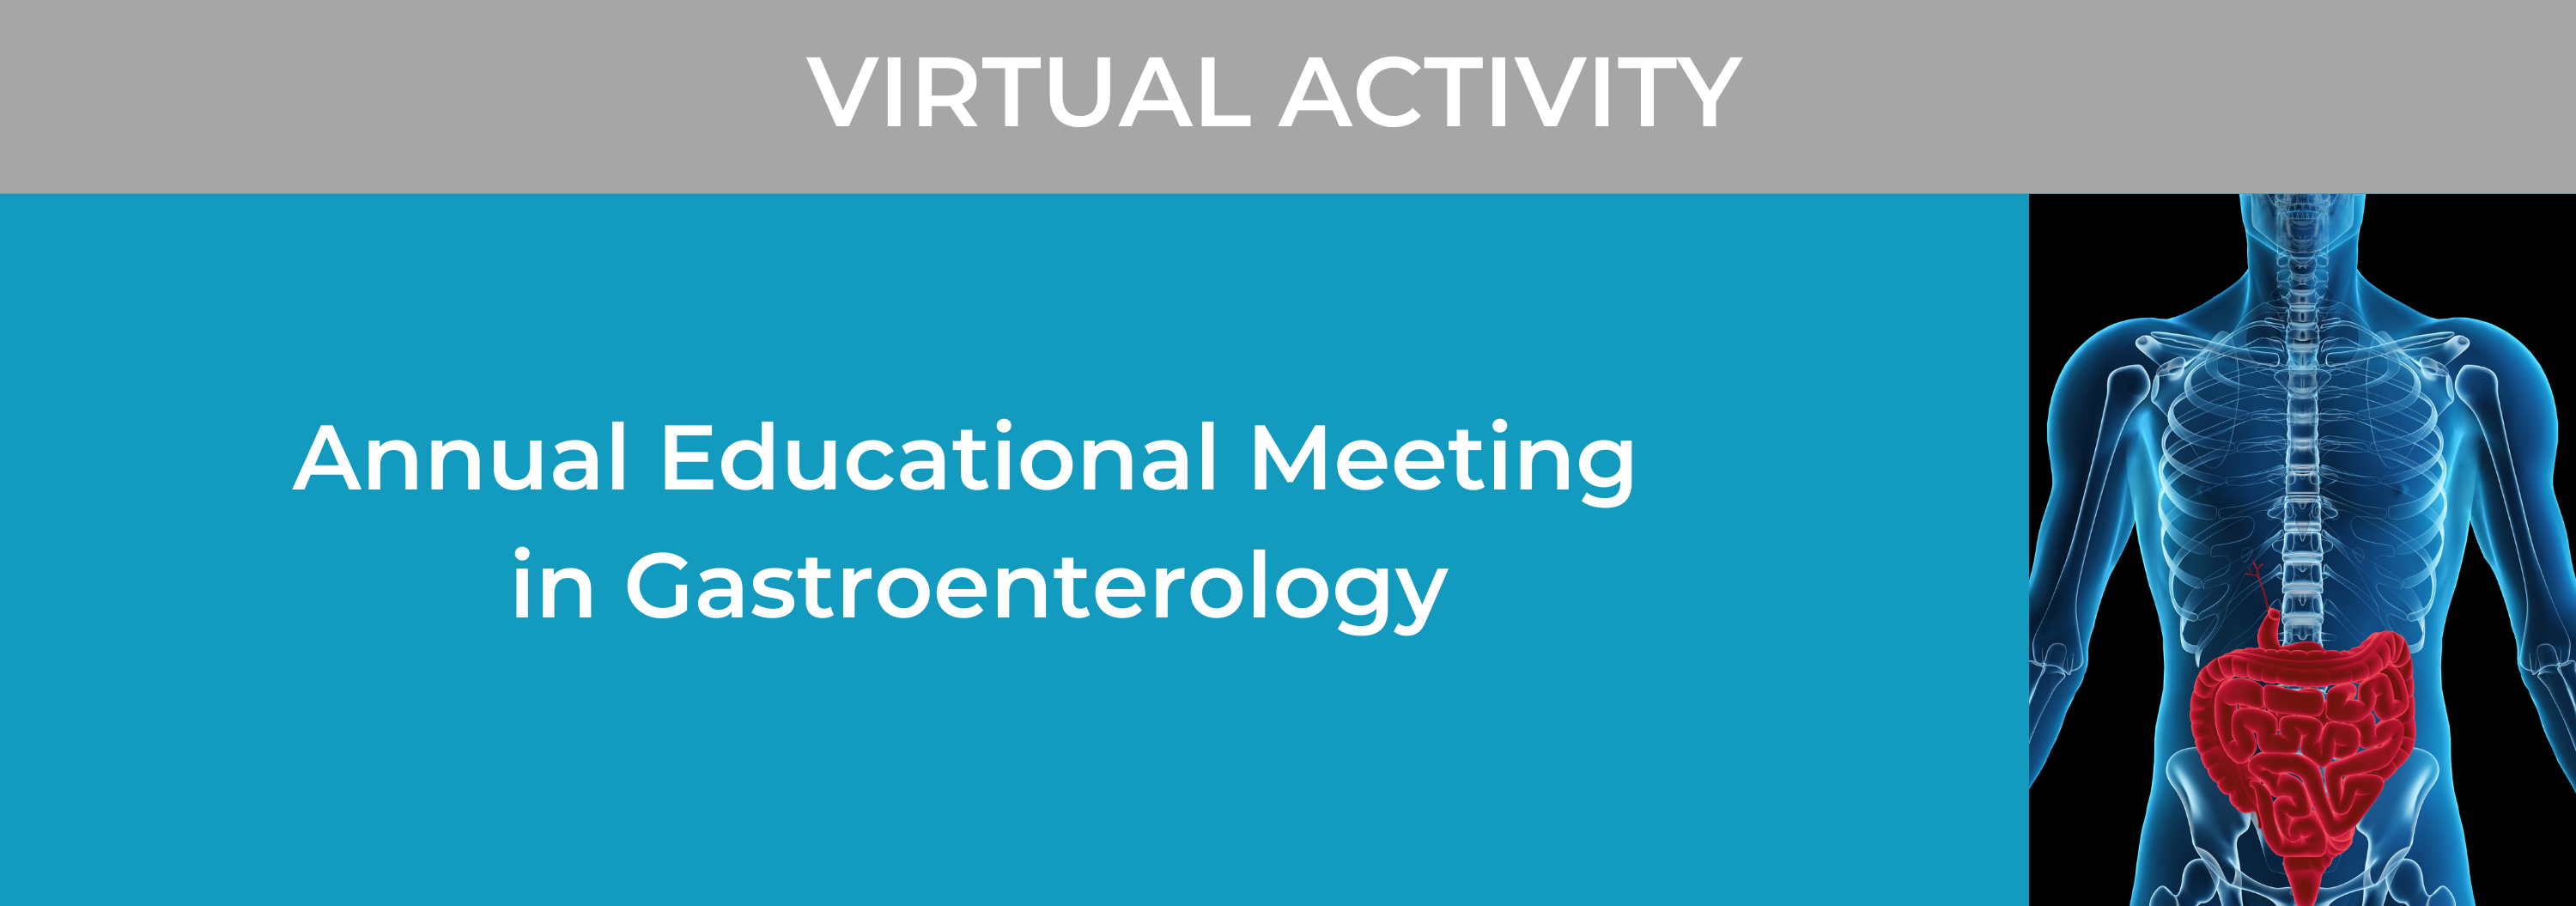 22nd Annual Educational Meeting in Gastroenterology Banner